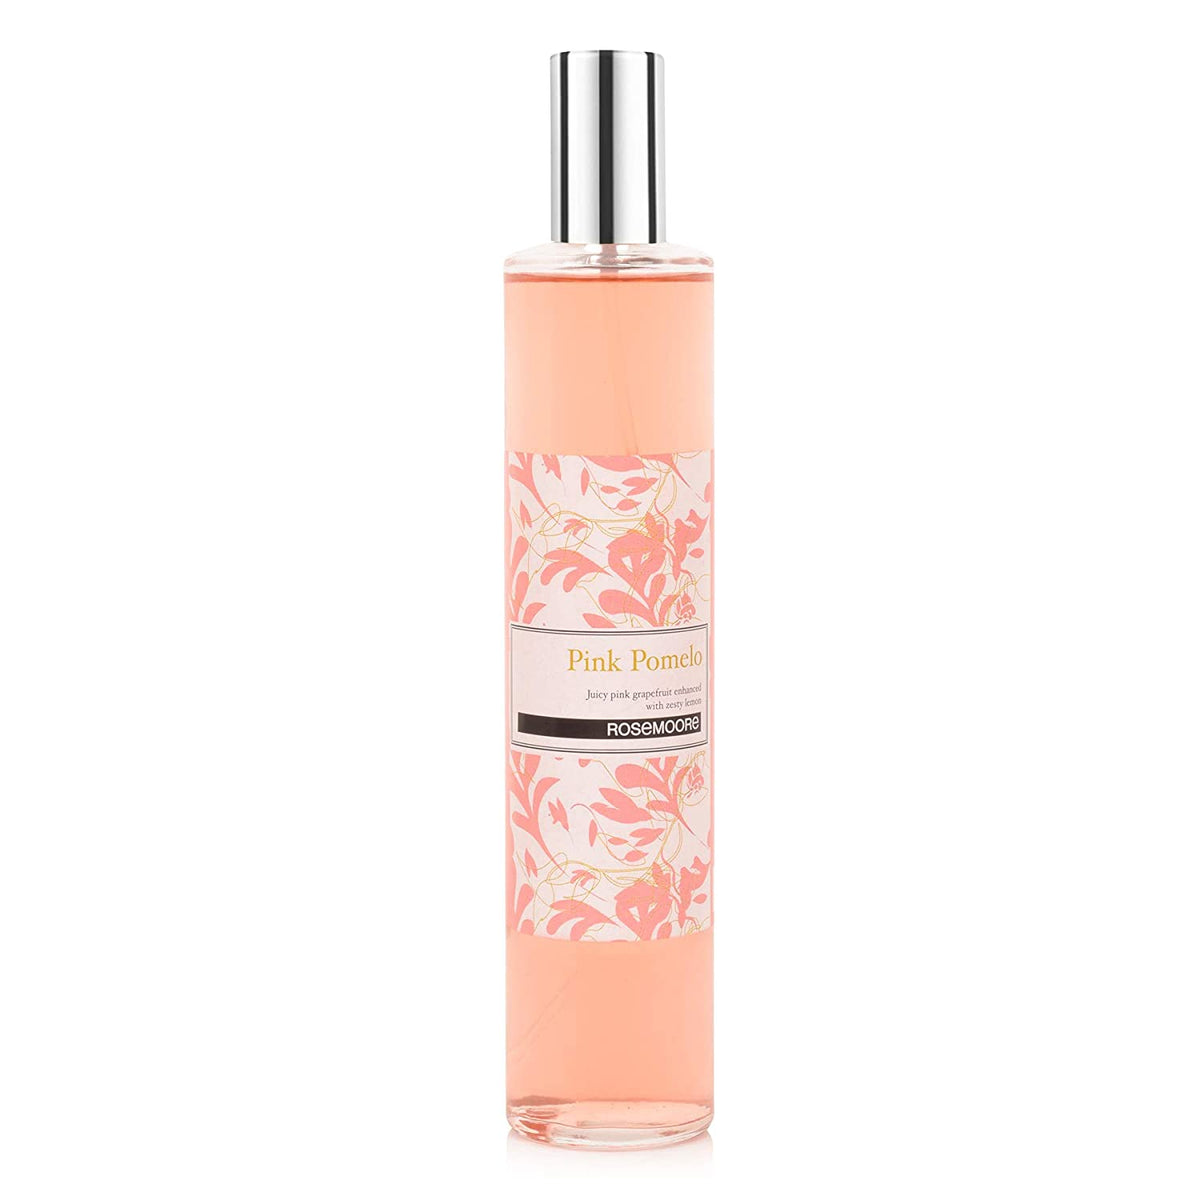 Scented Room Spray Pink Pomelo